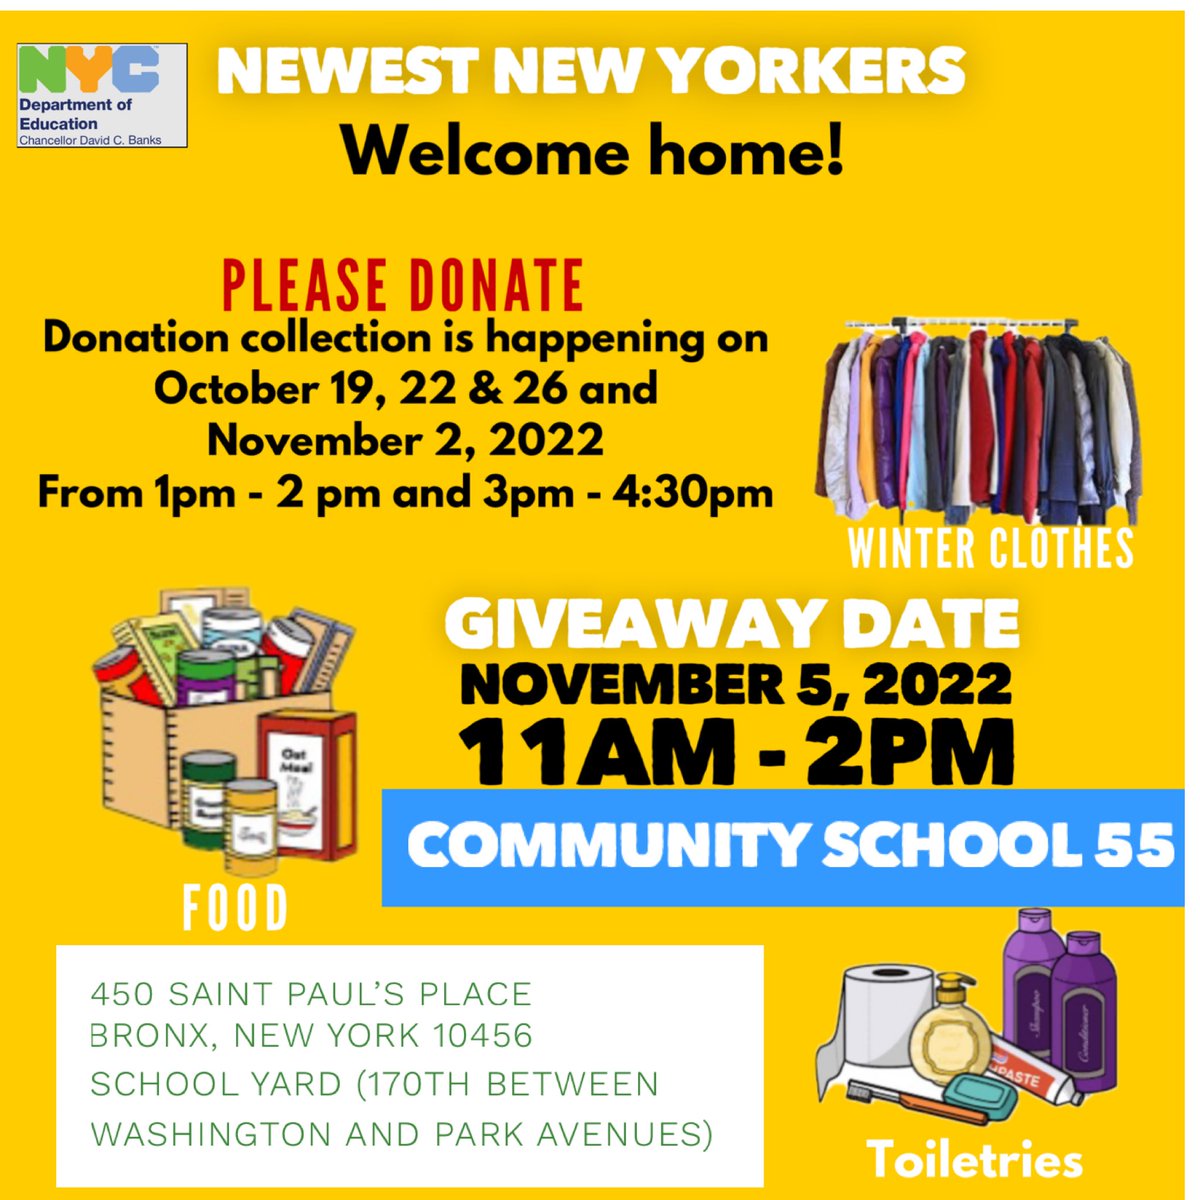 Starting tomorrow, we are collecting items for our Newest New Yorkers. We will be distributing these items November 5, 2022. We are collecting winter clothing, food and toiletries. Dm if you want to support, donate or set up a resource table. Have a blessed evening.